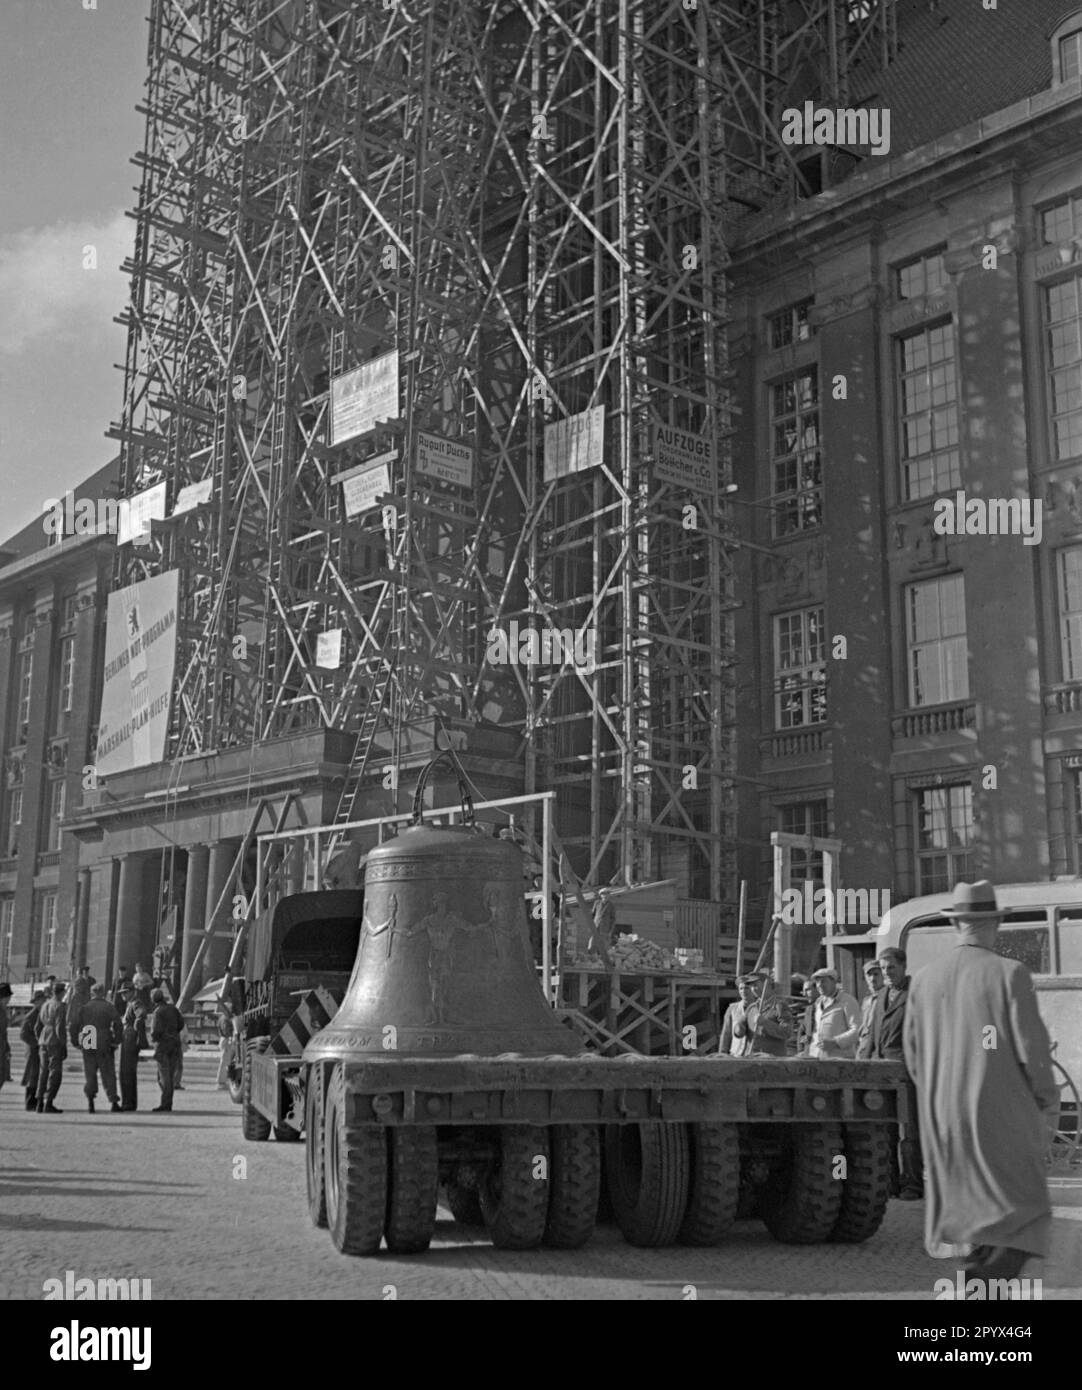 Photo of the Freedom Bell on the back of a low loader of the U.S. Army on Rathausplatz shortly before its installation in the tower of the seat of the Governing Mayor of Berlin, Ernst Reuter (1948-1953) on October 21, 1950. On the right, construction workers in white coats. On the right side of the truck, American soldiers in front of the columned doorway. In the background, the scaffolded tower and the partially destroyed facade of the building. On the scaffold, a poster of the American occupation force (inscription: Emergency Programme of Berlin with European Recovery Program). The bell Stock Photo